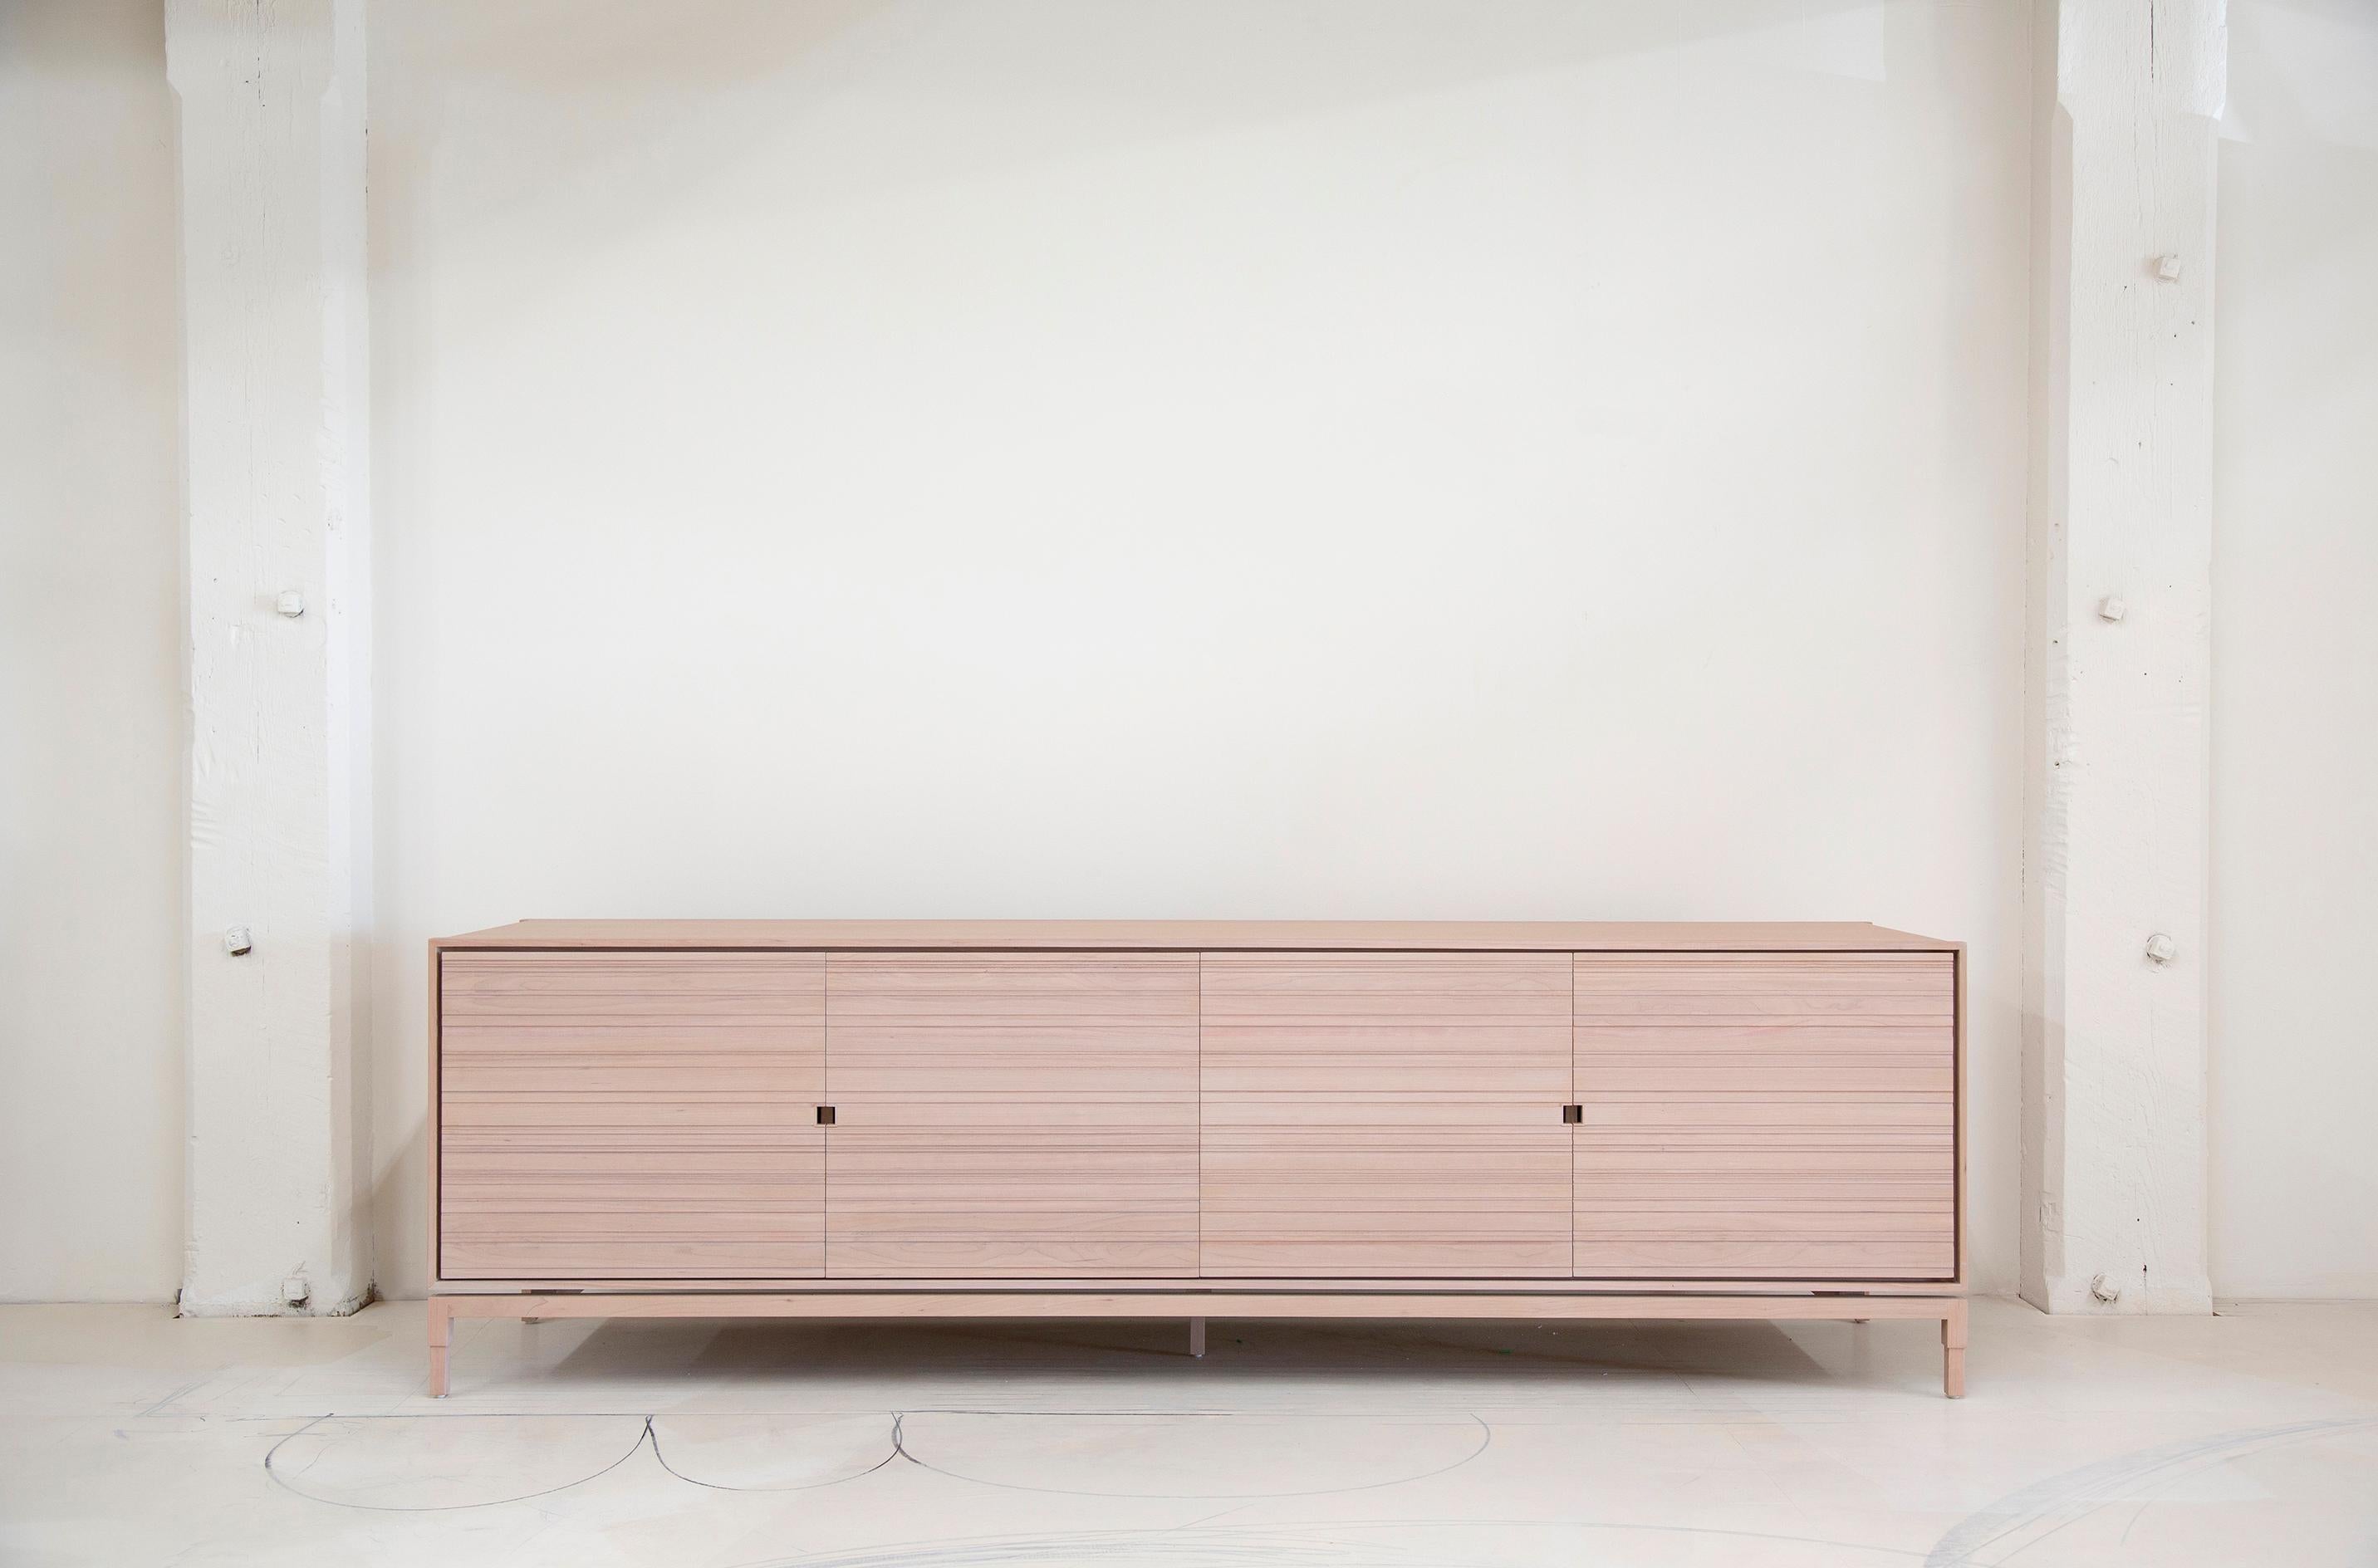 American Chicago Credenza in Blush by May Furniture